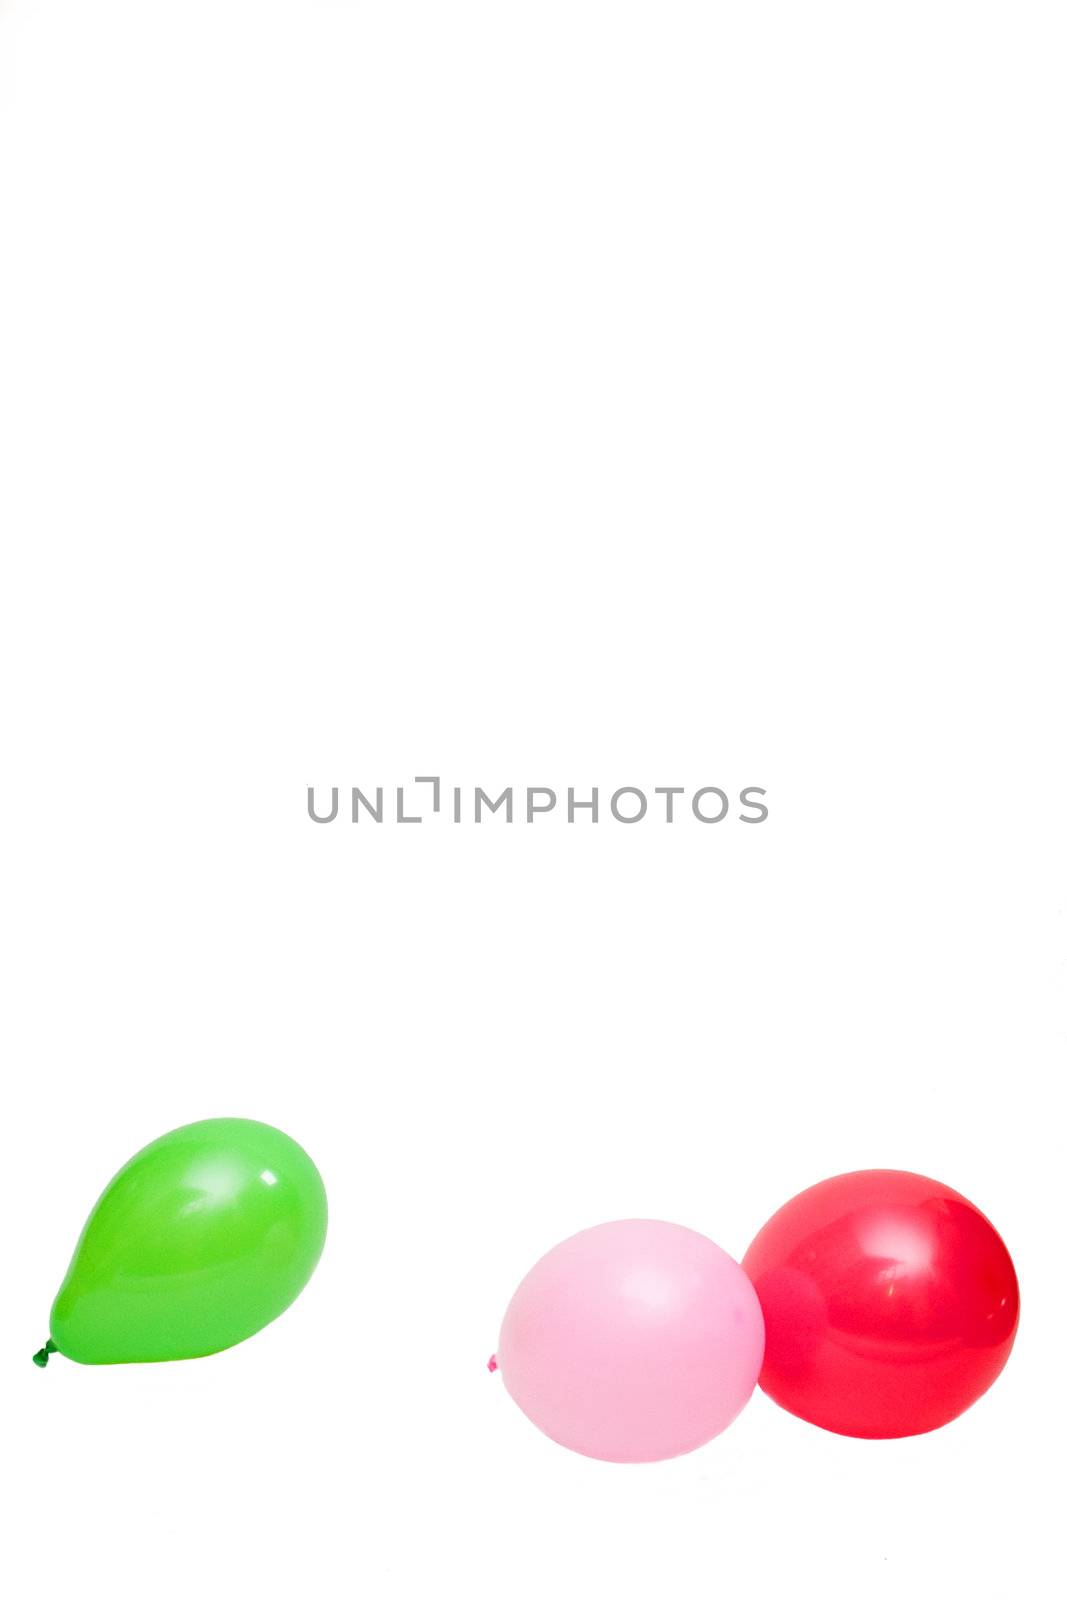 Colorful balloons by Yaurinko